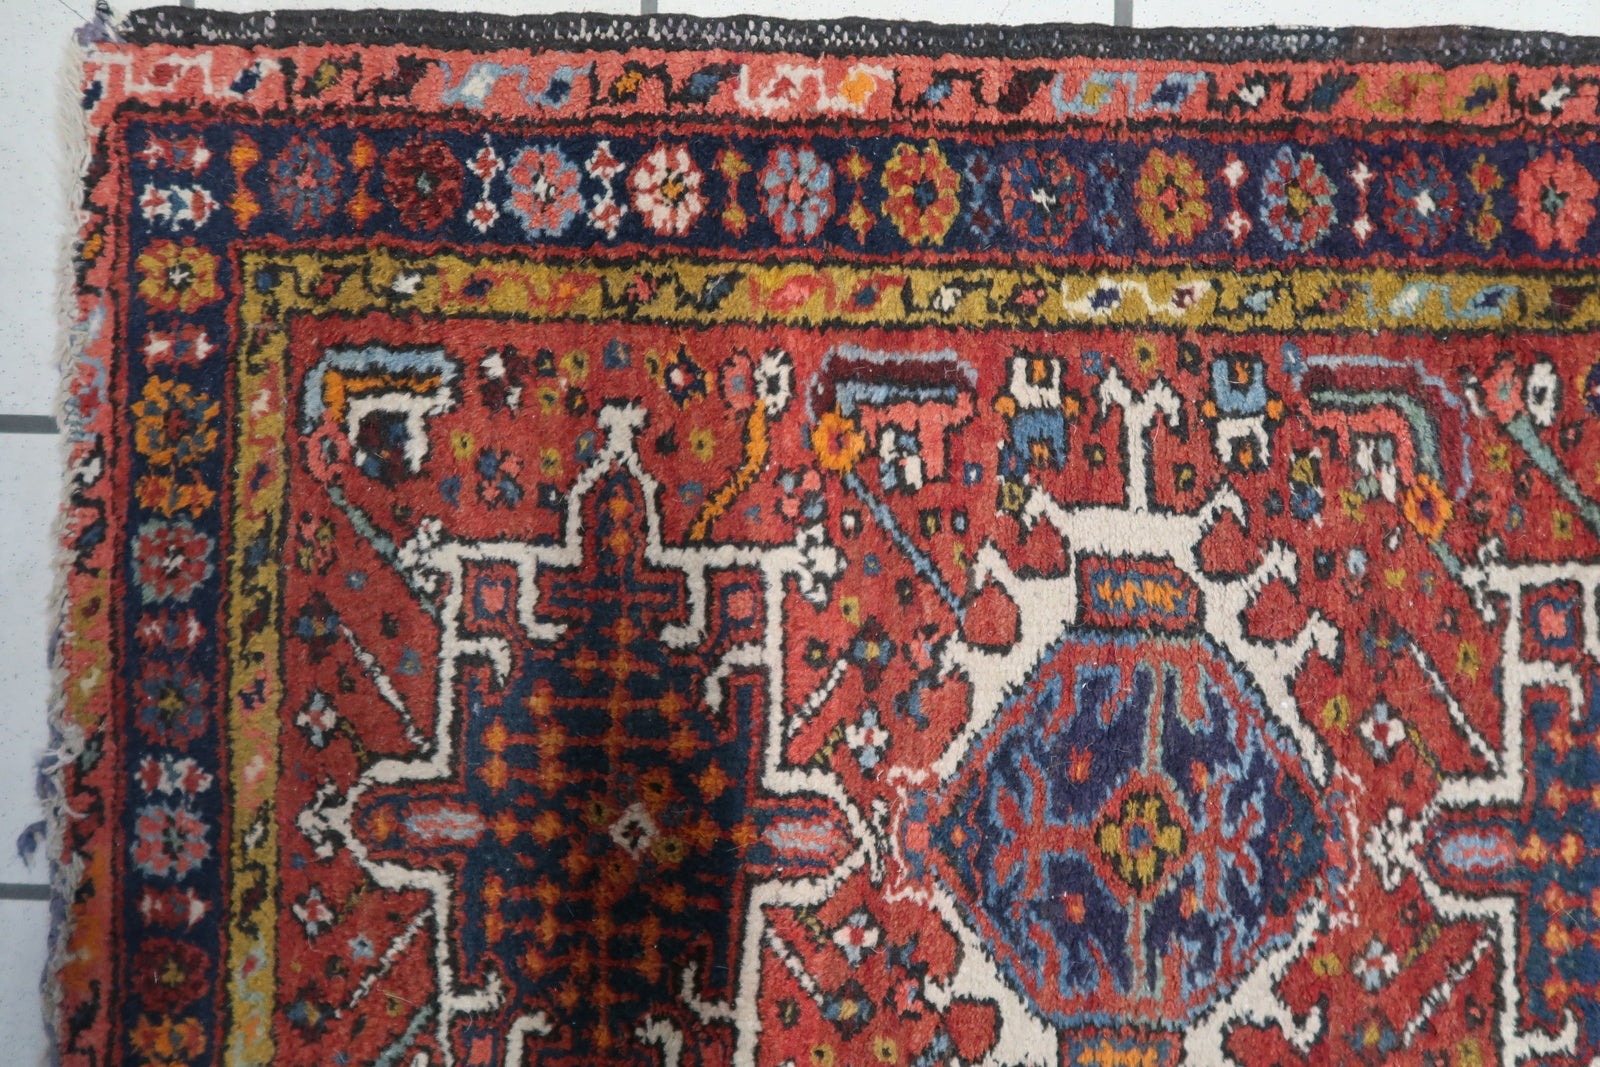 Detailed view of the turquoise and yellow accents on the Handmade Antique Persian Karajeh Rug